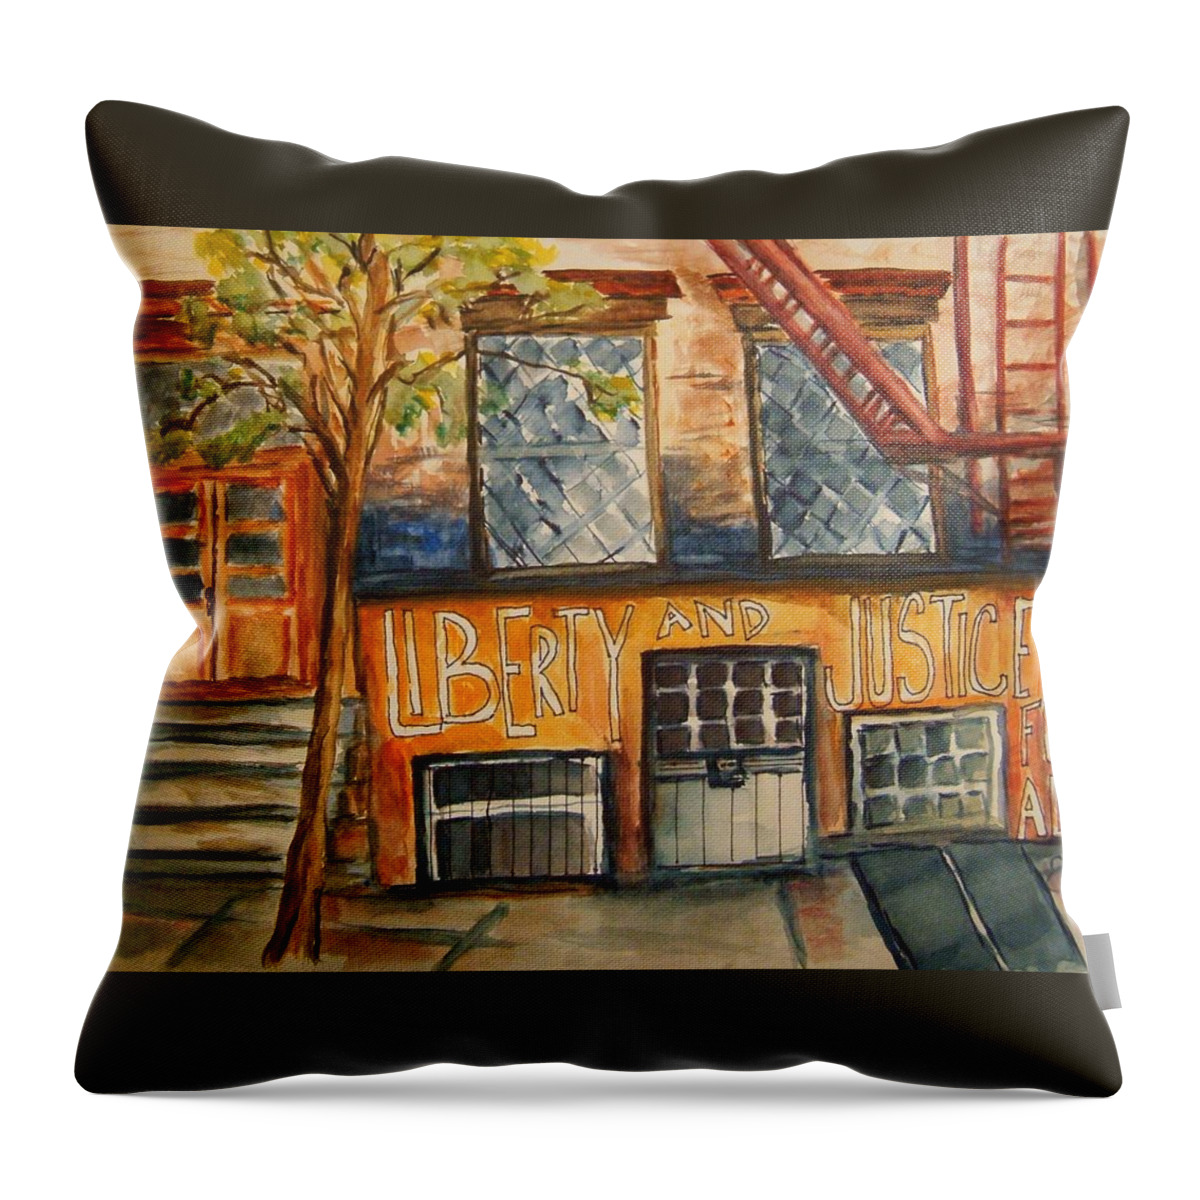 New York City Throw Pillow featuring the painting NYC Graffiti by Elaine Duras